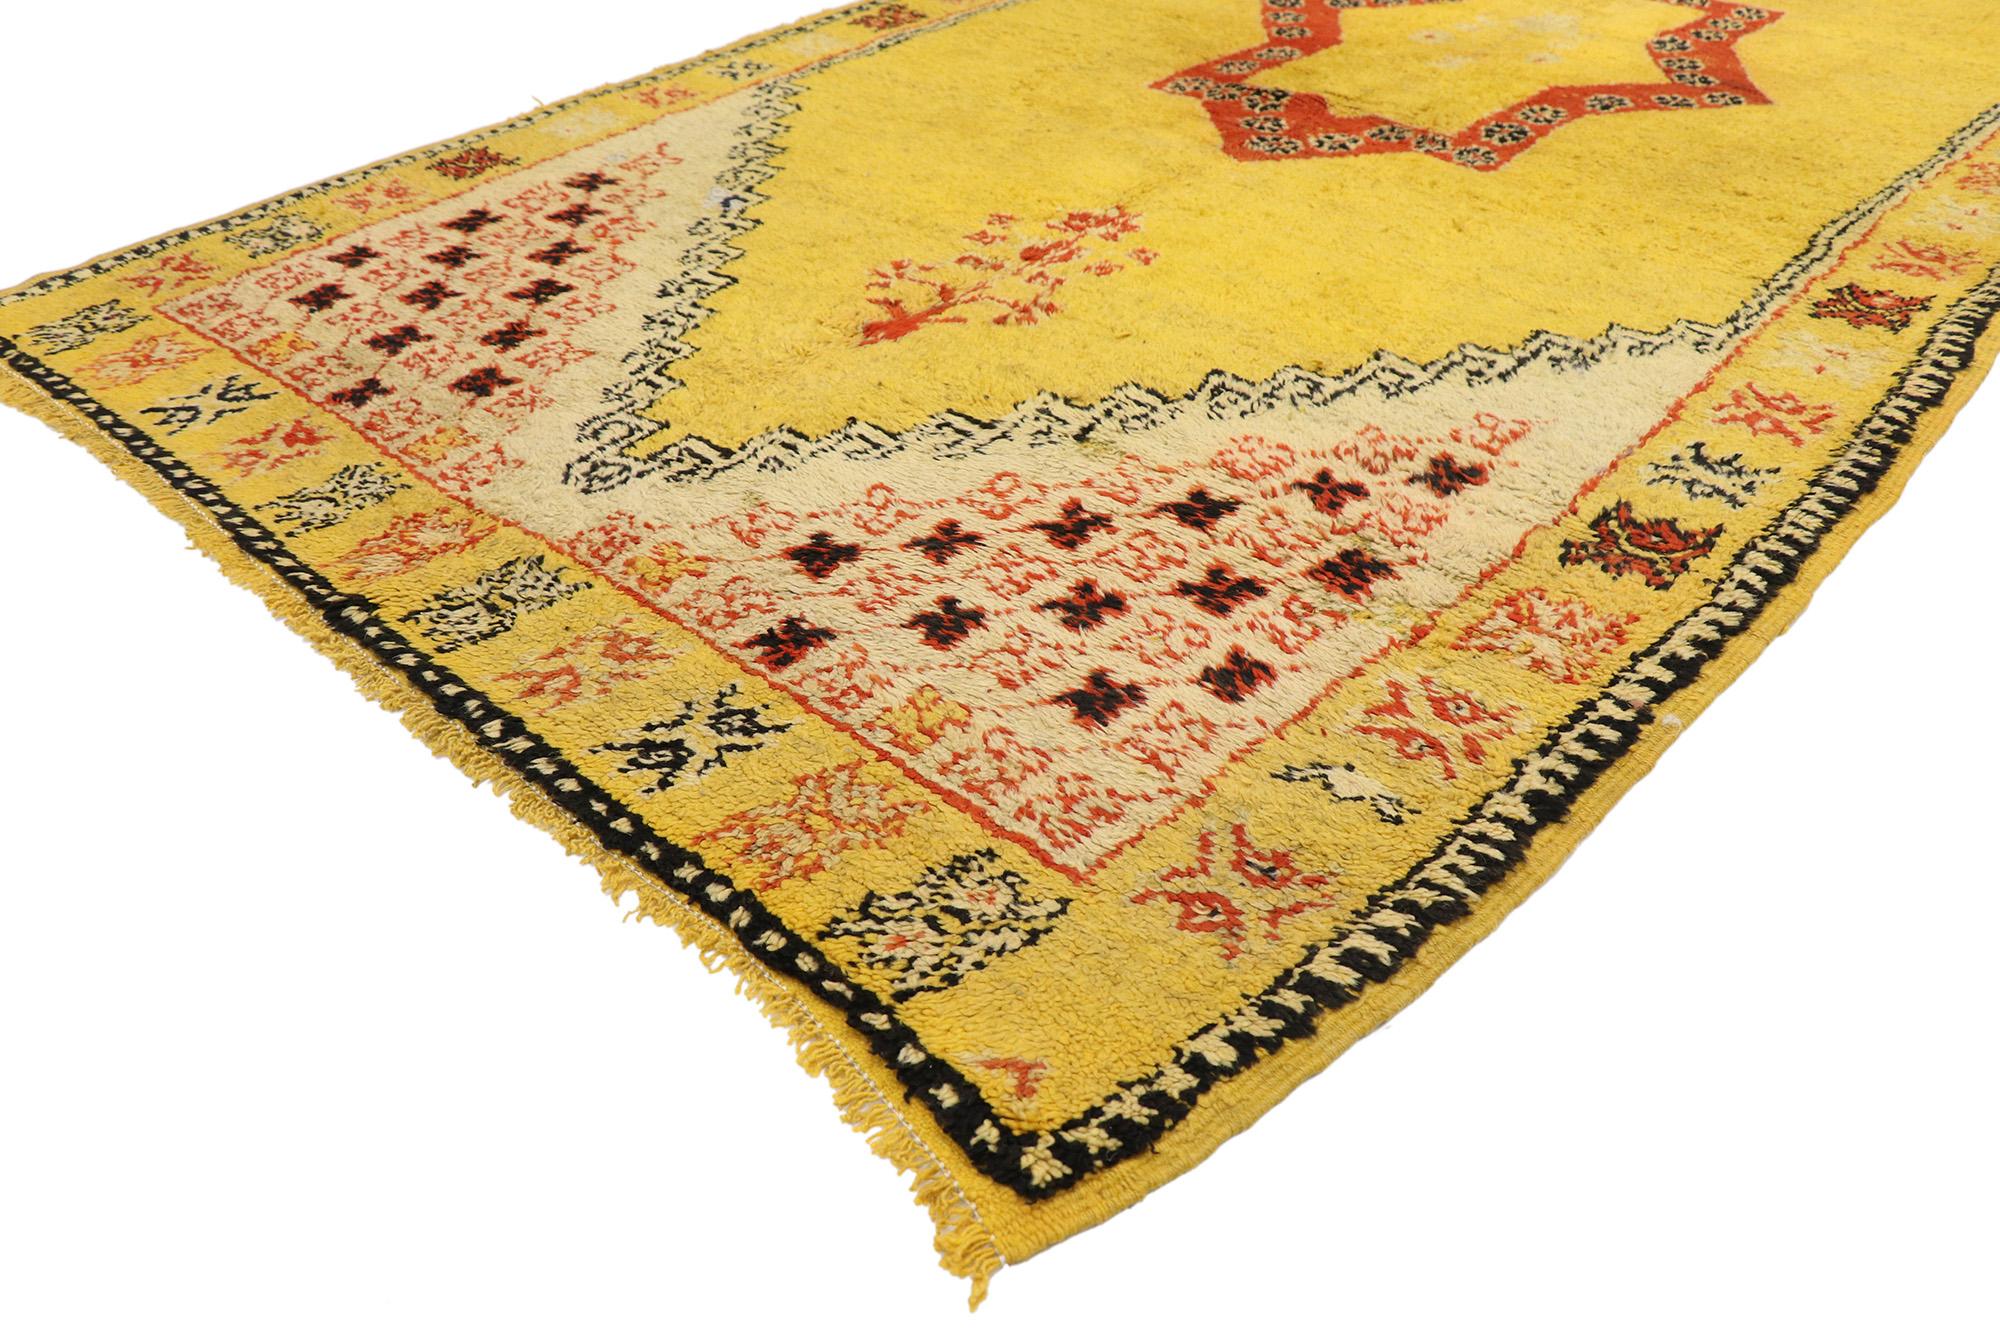 20223, vintage Berber Moroccan rug with boho chic style 04'11 x 08'09. Full of tiny details and a bold expressive design combined with exuberant colors and bohemian style, this hand-knotted wool vintage Berber Moroccan rug is a captivating vision of